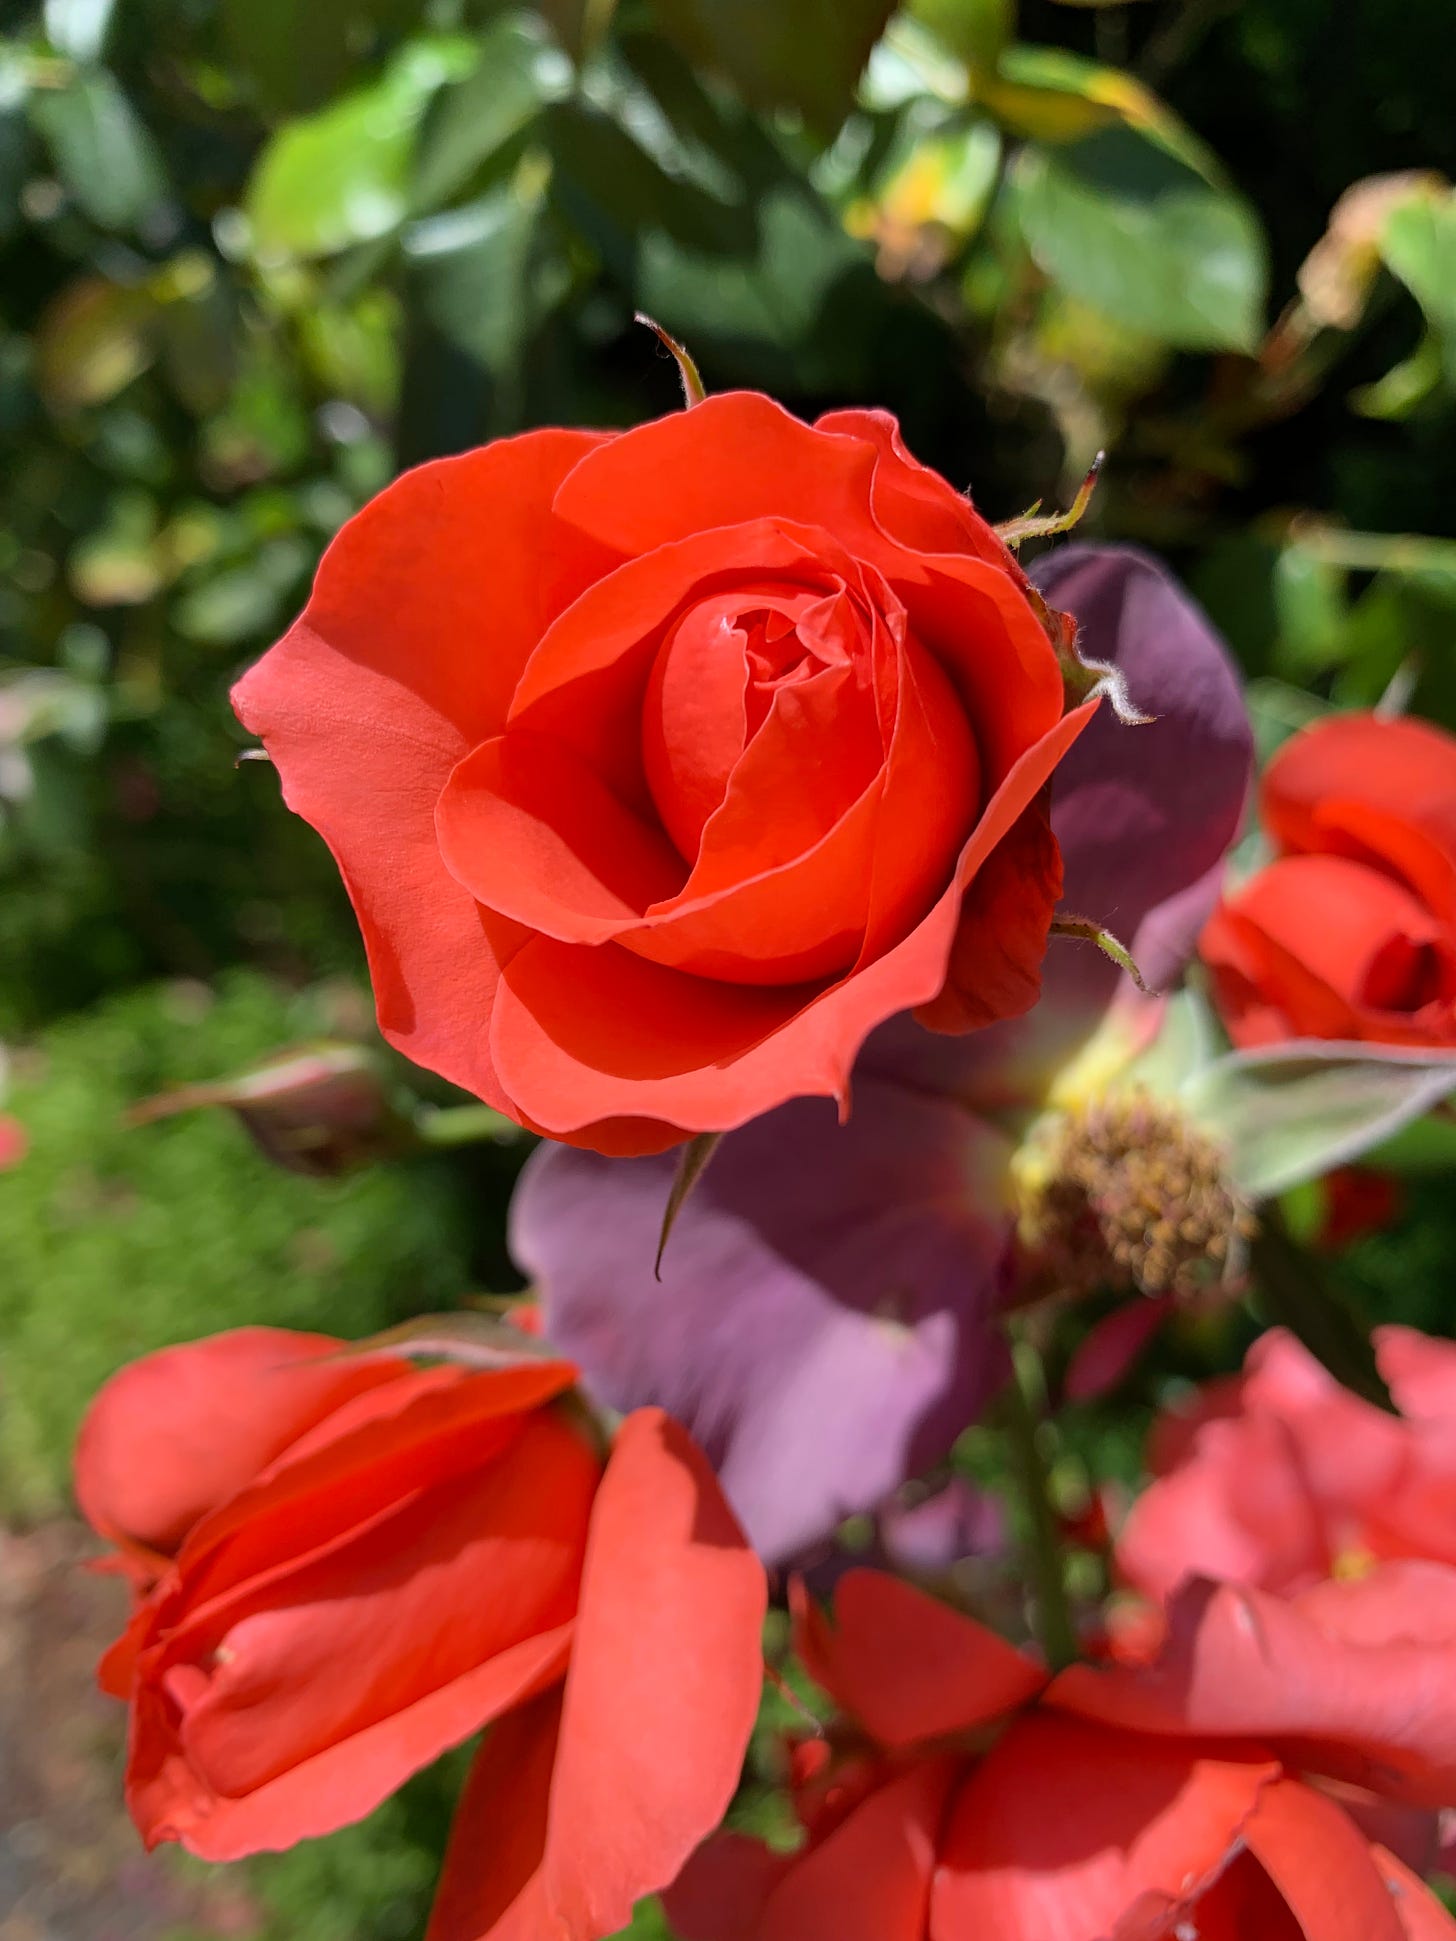 A red rose blooms against a green background.